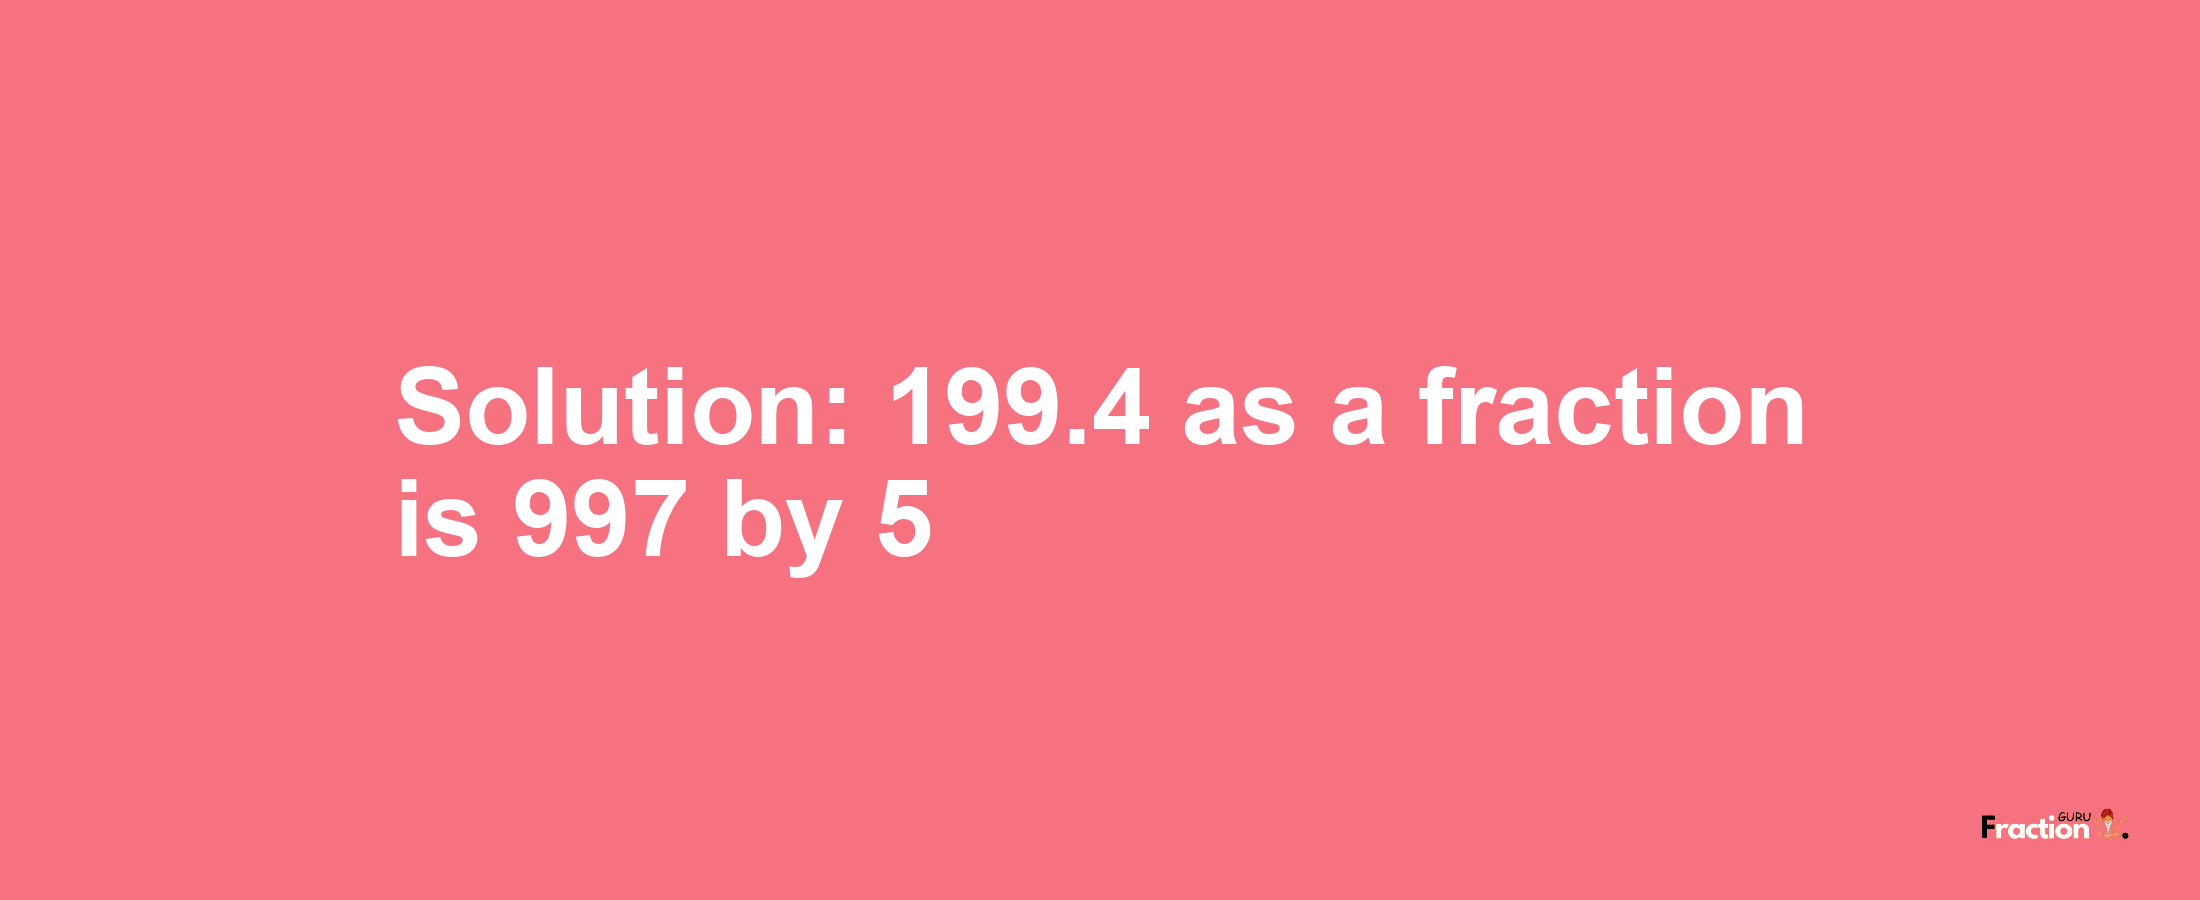 Solution:199.4 as a fraction is 997/5